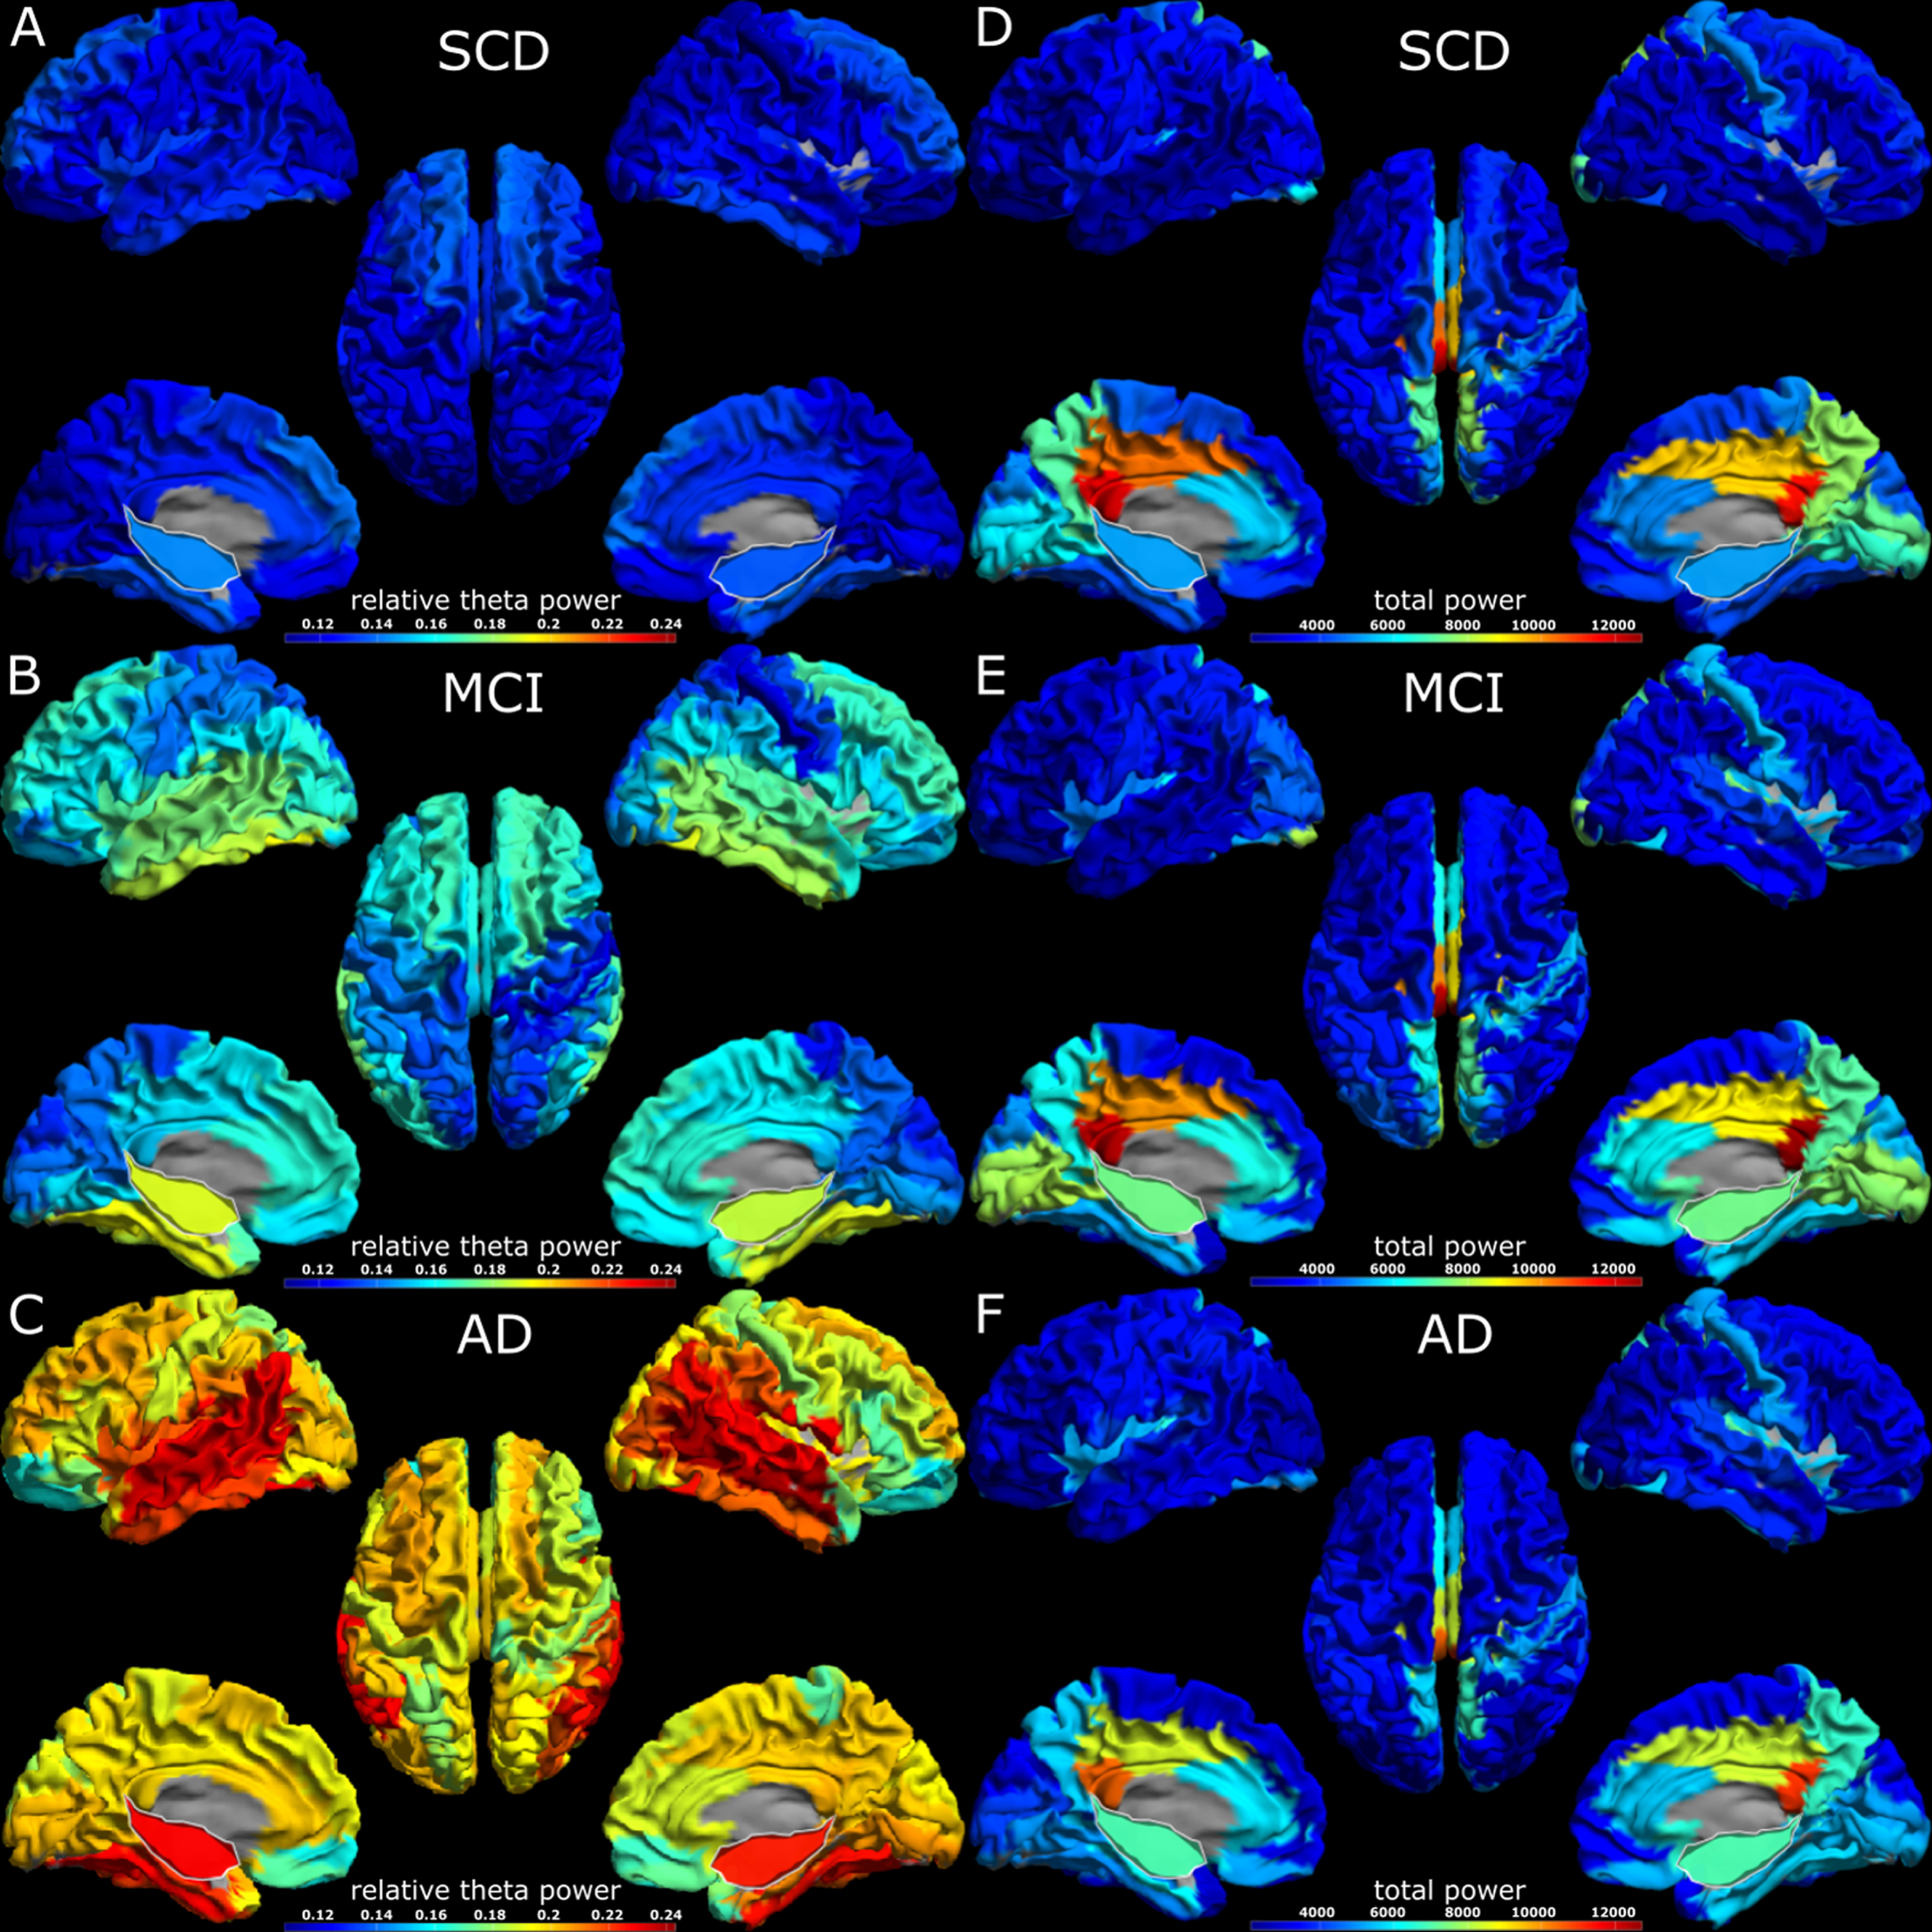 3D headplots of spectral analysis results across groups. The hippocampus has been projected on the medial surface and is outlined in white. Panels A-C display relative theta power, while panels D-F display total power results. The virtual electrodes were scaled by a factor of one hundred when converting from *.fif to *.asc format. SCD, subjective cognitive decline; MCI, mild cognitive impairment; AD, Alzheimer’s disease.